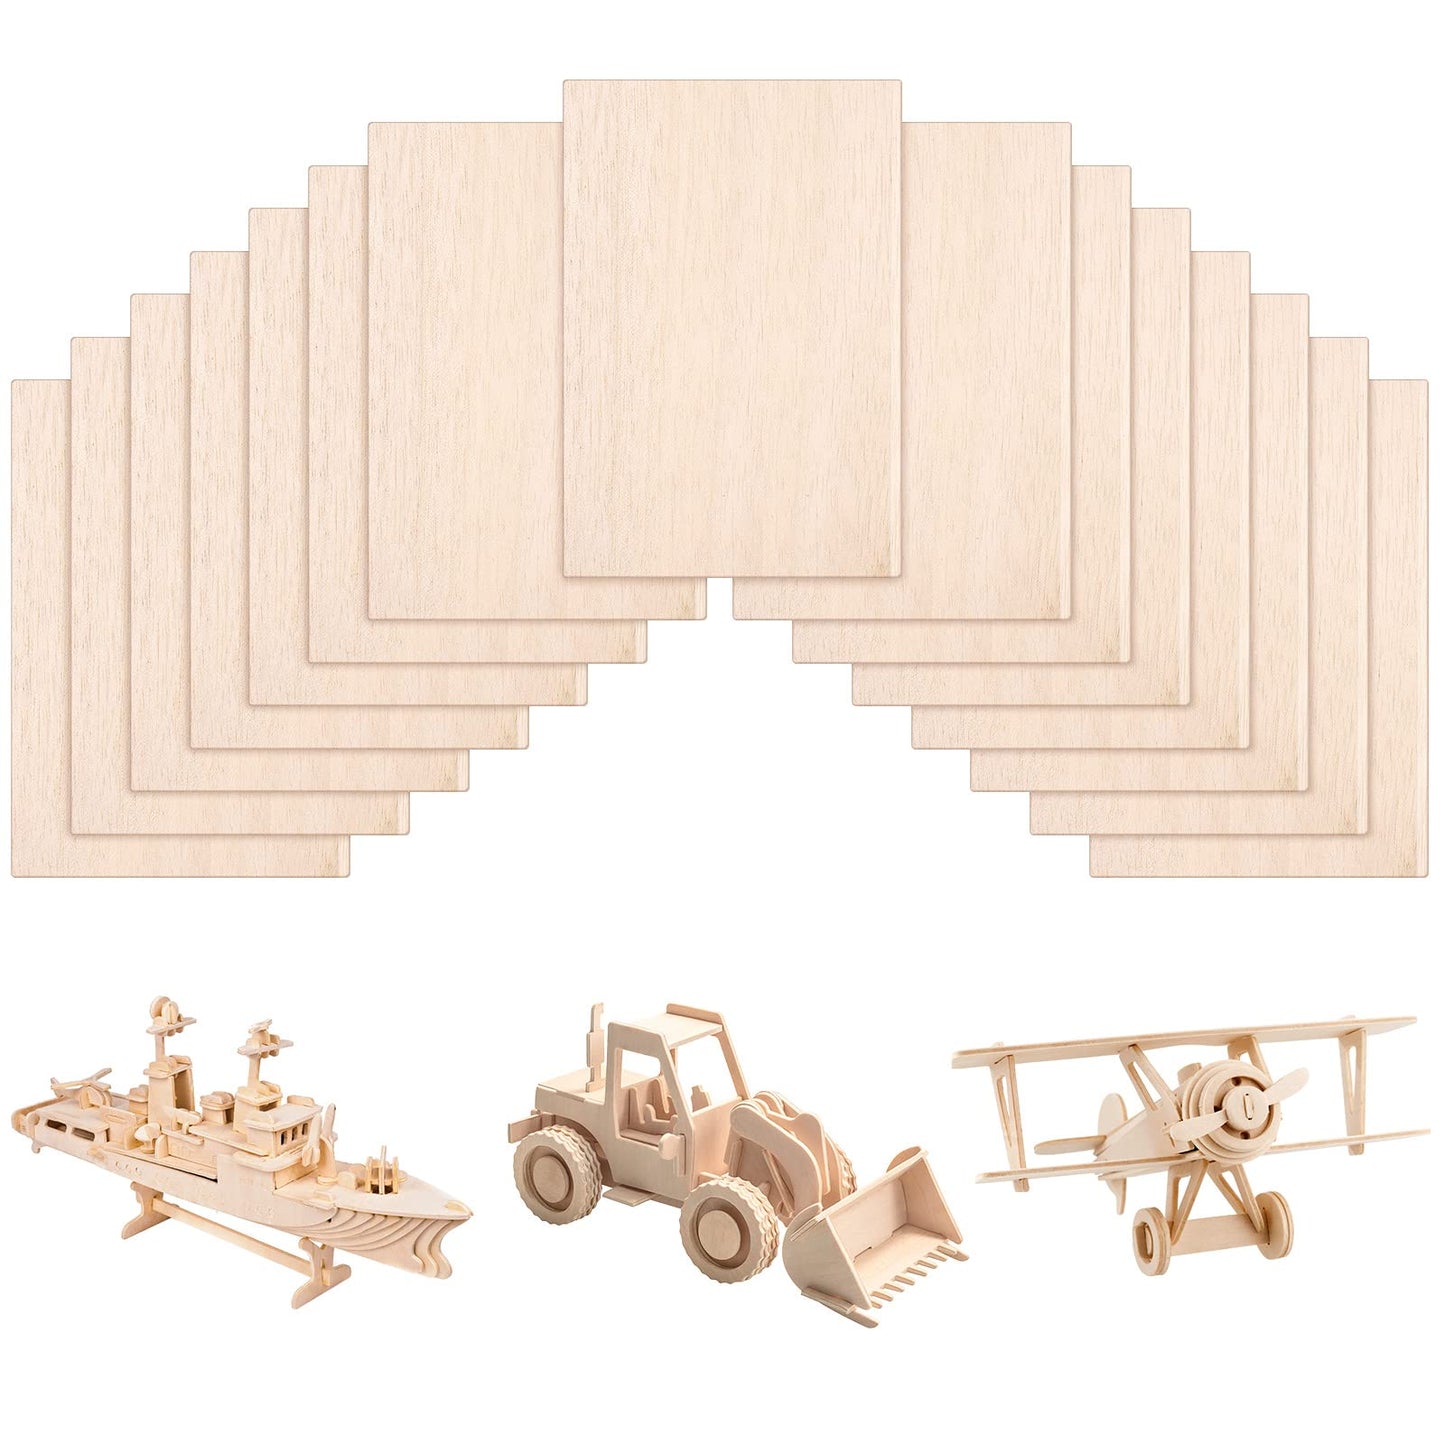 30 Pack 4 x 6 Inch Balsa Wood Sheets Thin Plywood Wood Sheets Balsa Wood Sheets for Crafts Unfinished Wood Sheets for Architectural Models Painting